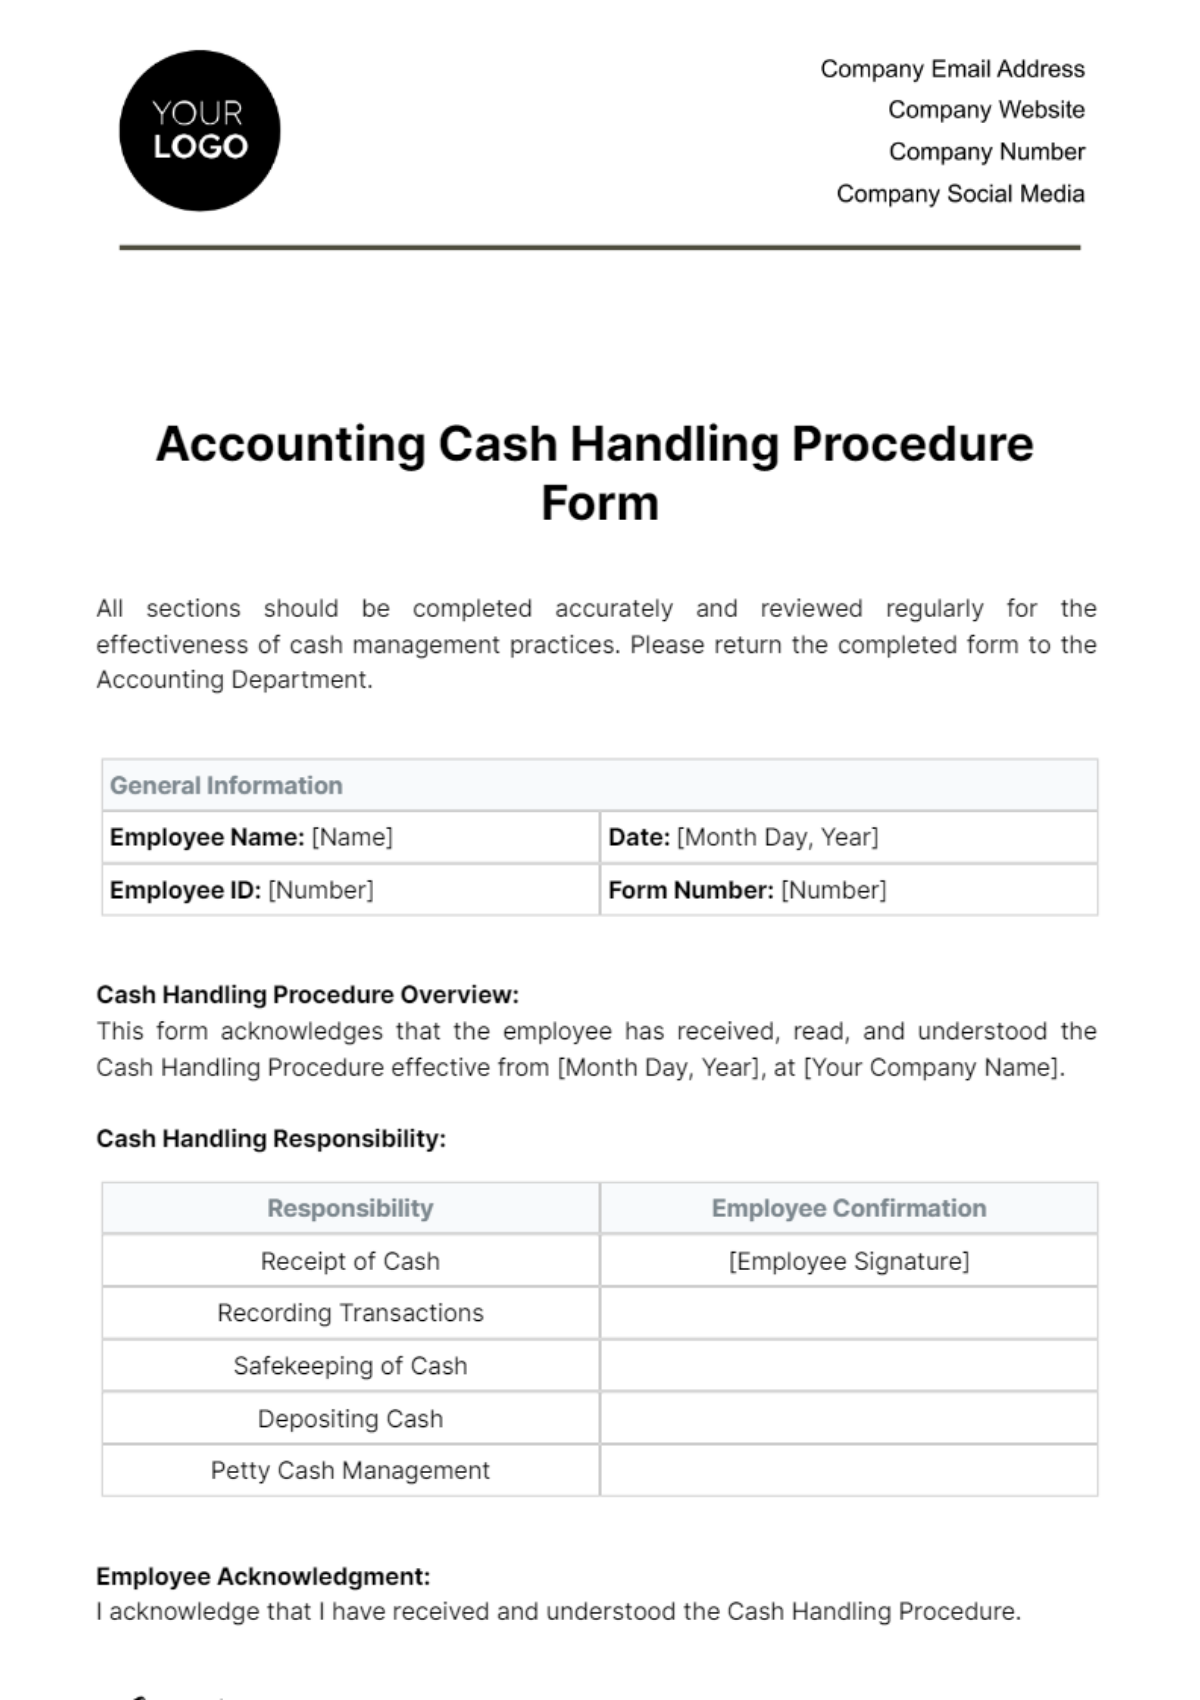 Free Accounting Cash Handling Procedure Form Template